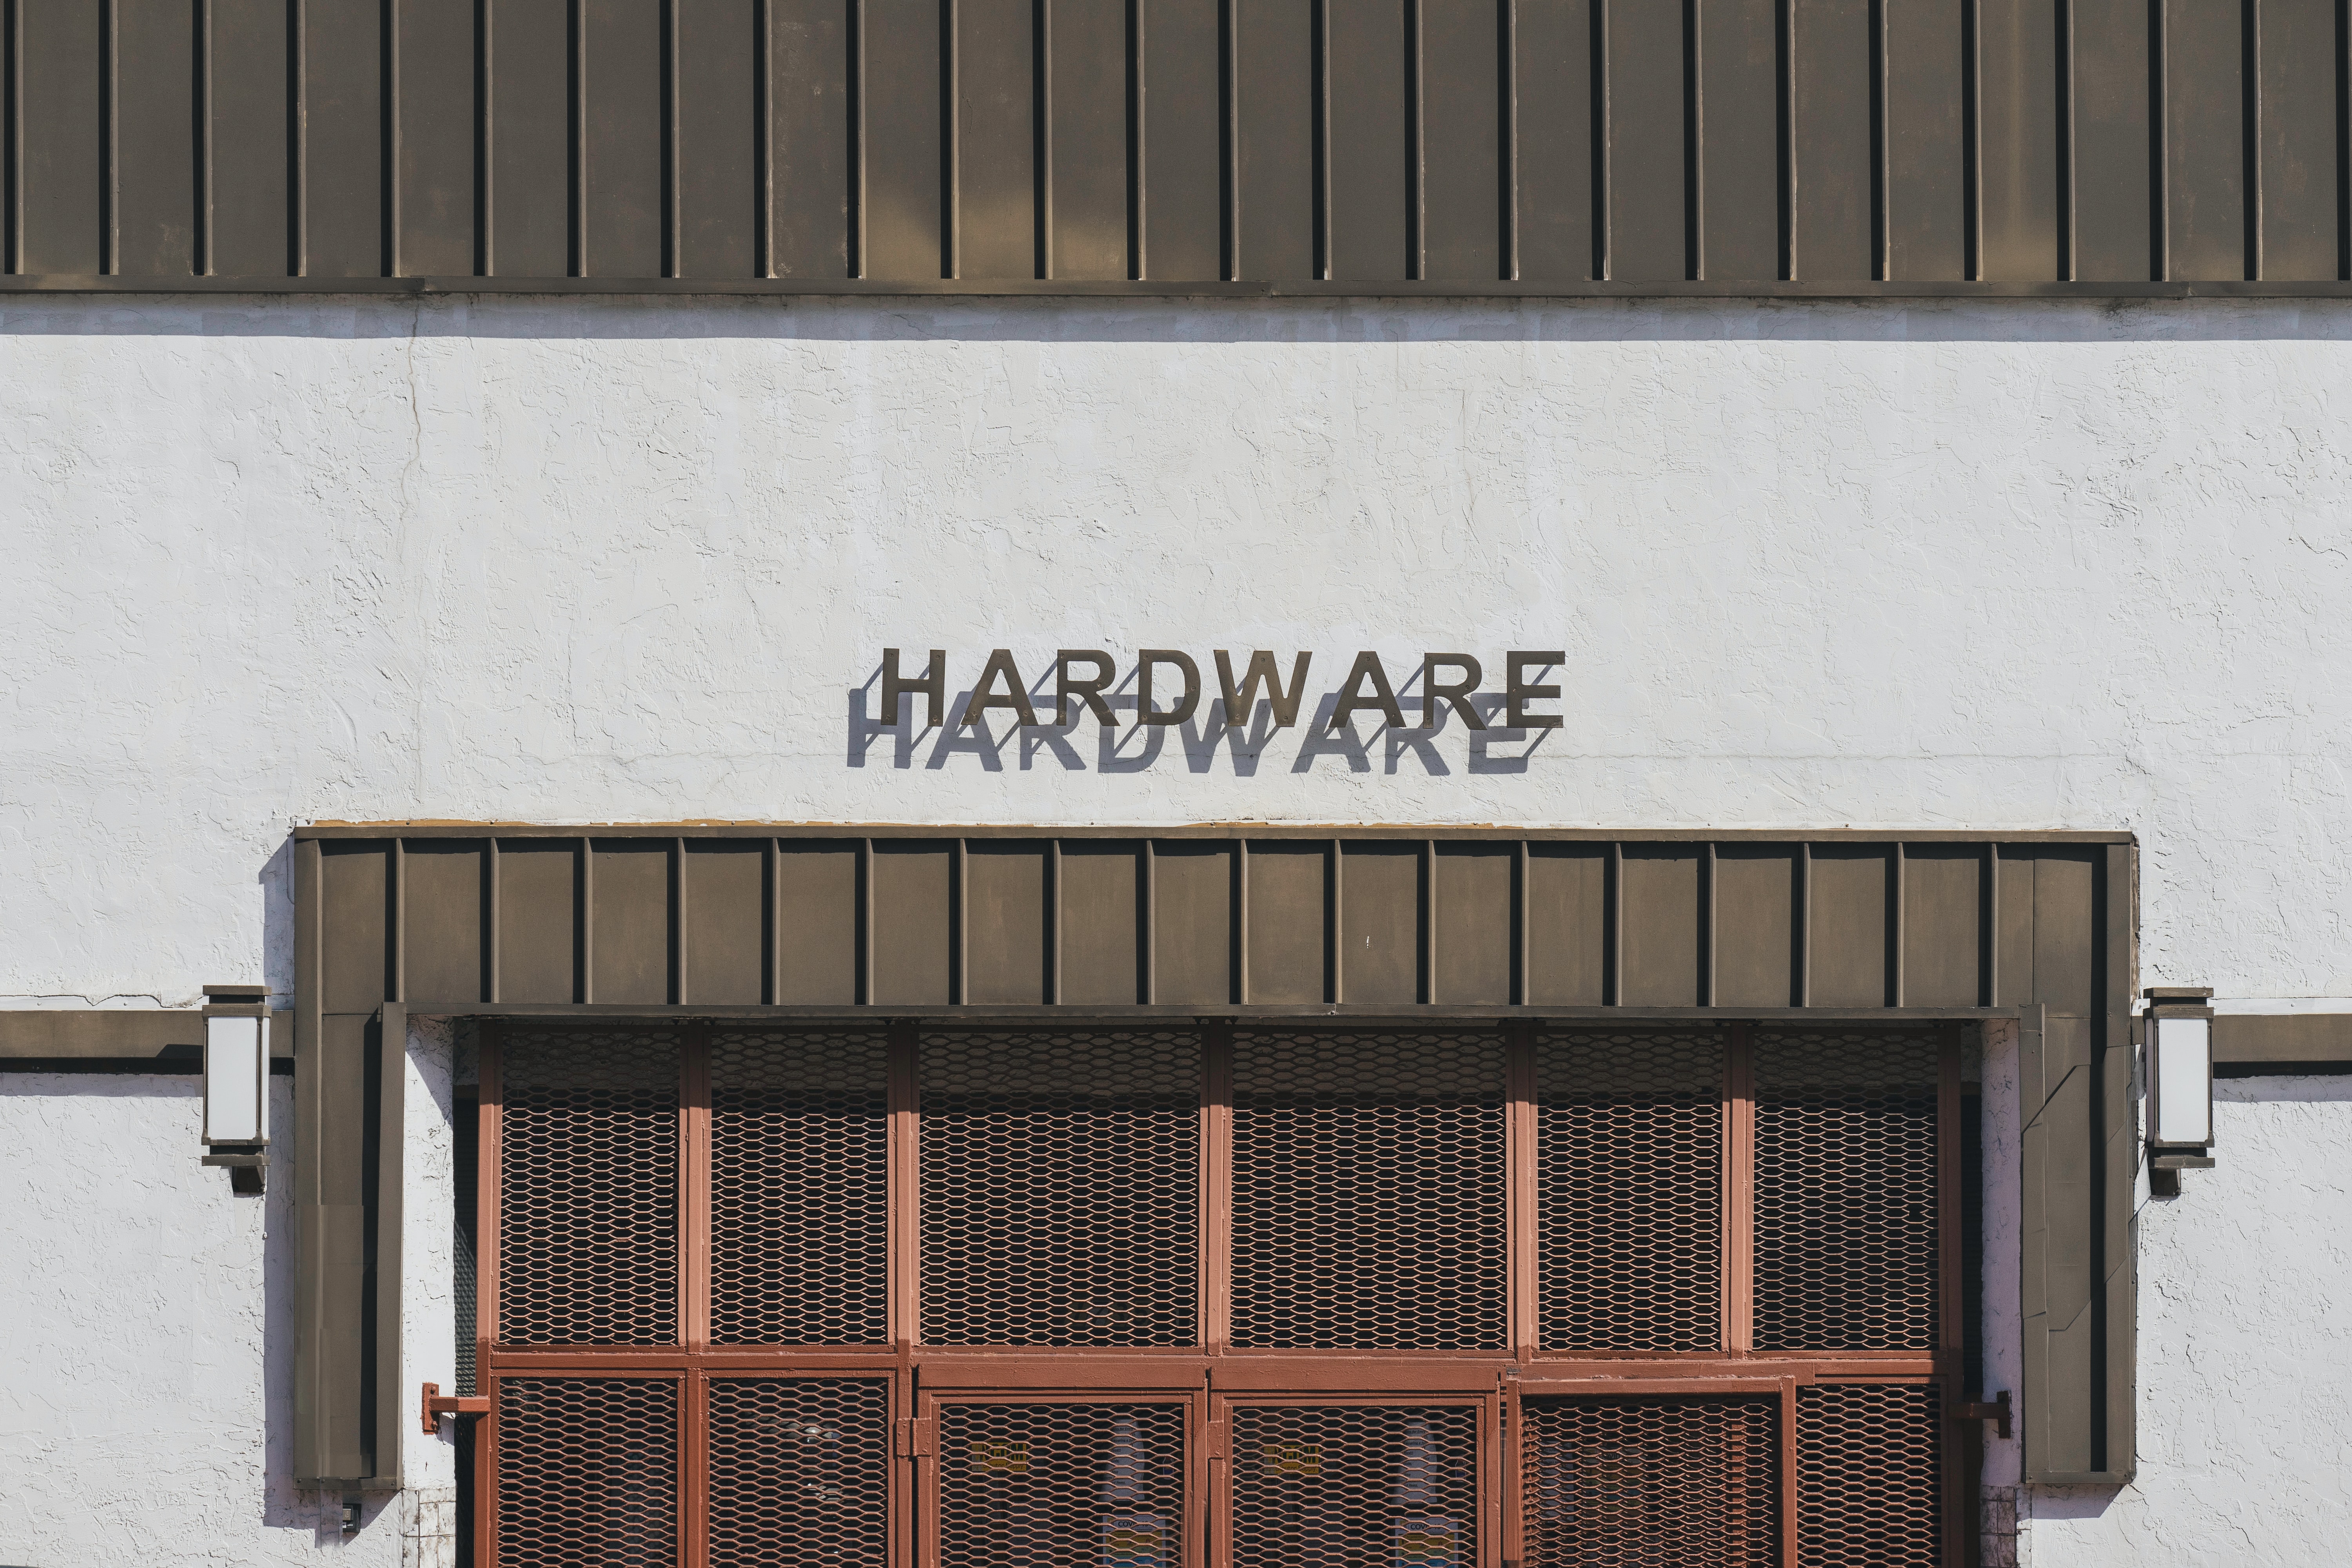 Exterior of hardware store